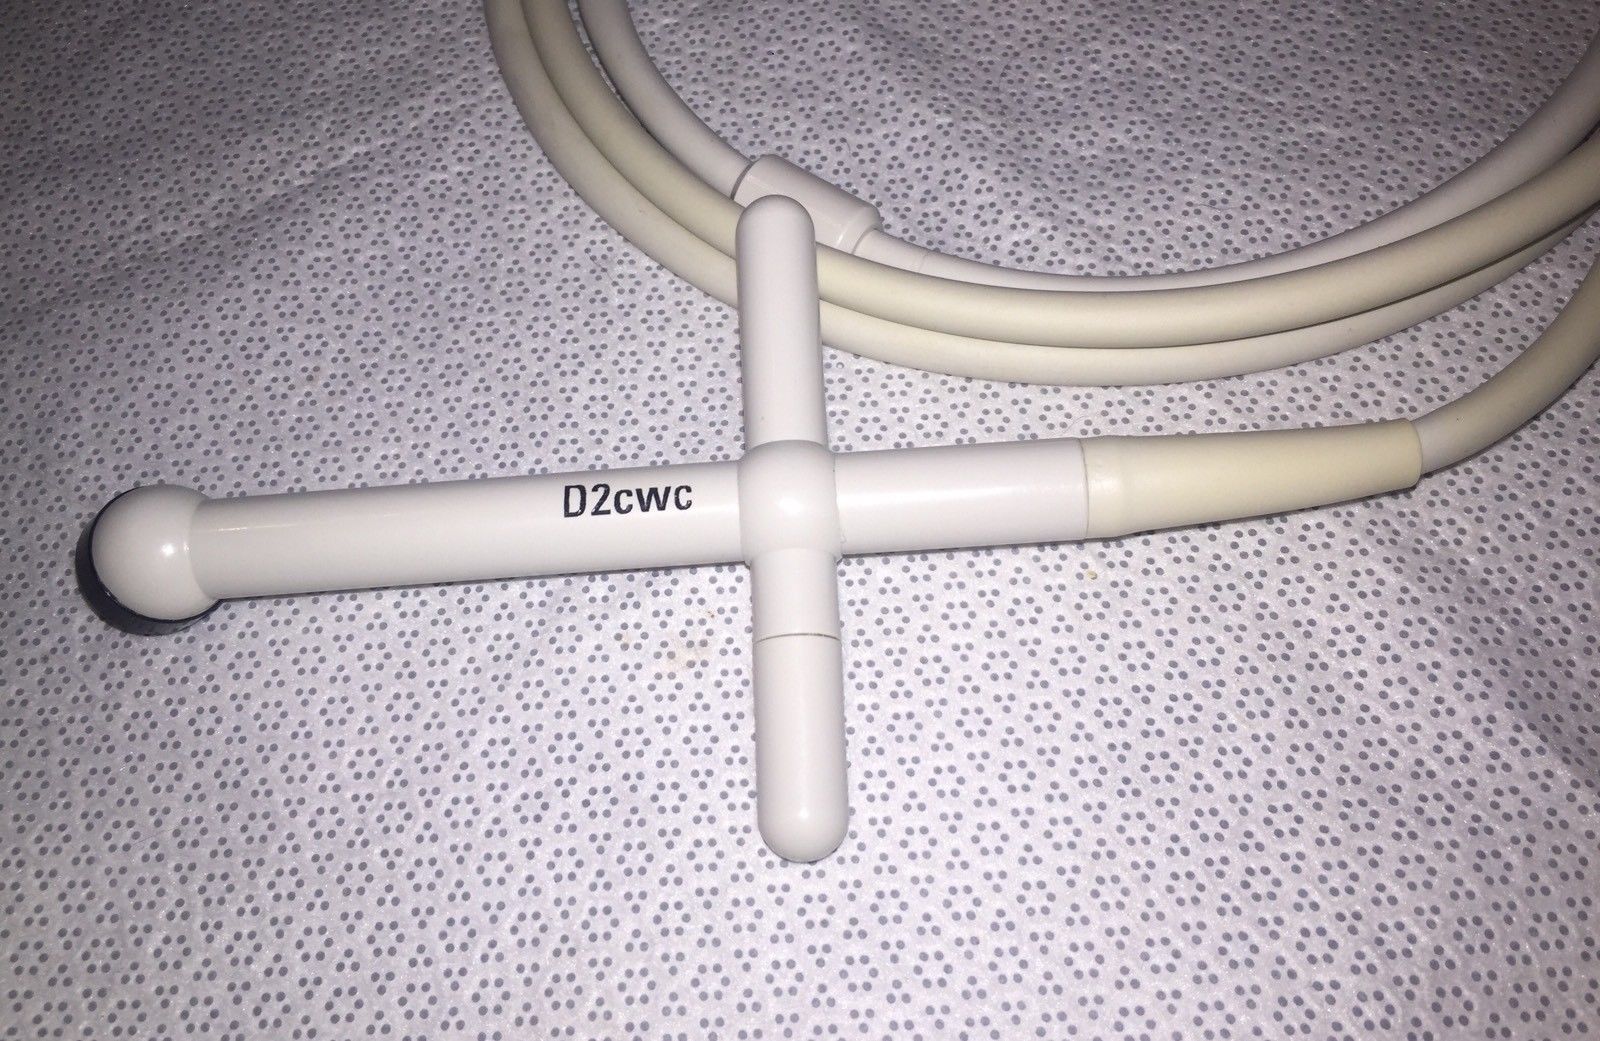 Philips D2CWC Ultrasound Probe for iU22 & iE33 CW Doppler